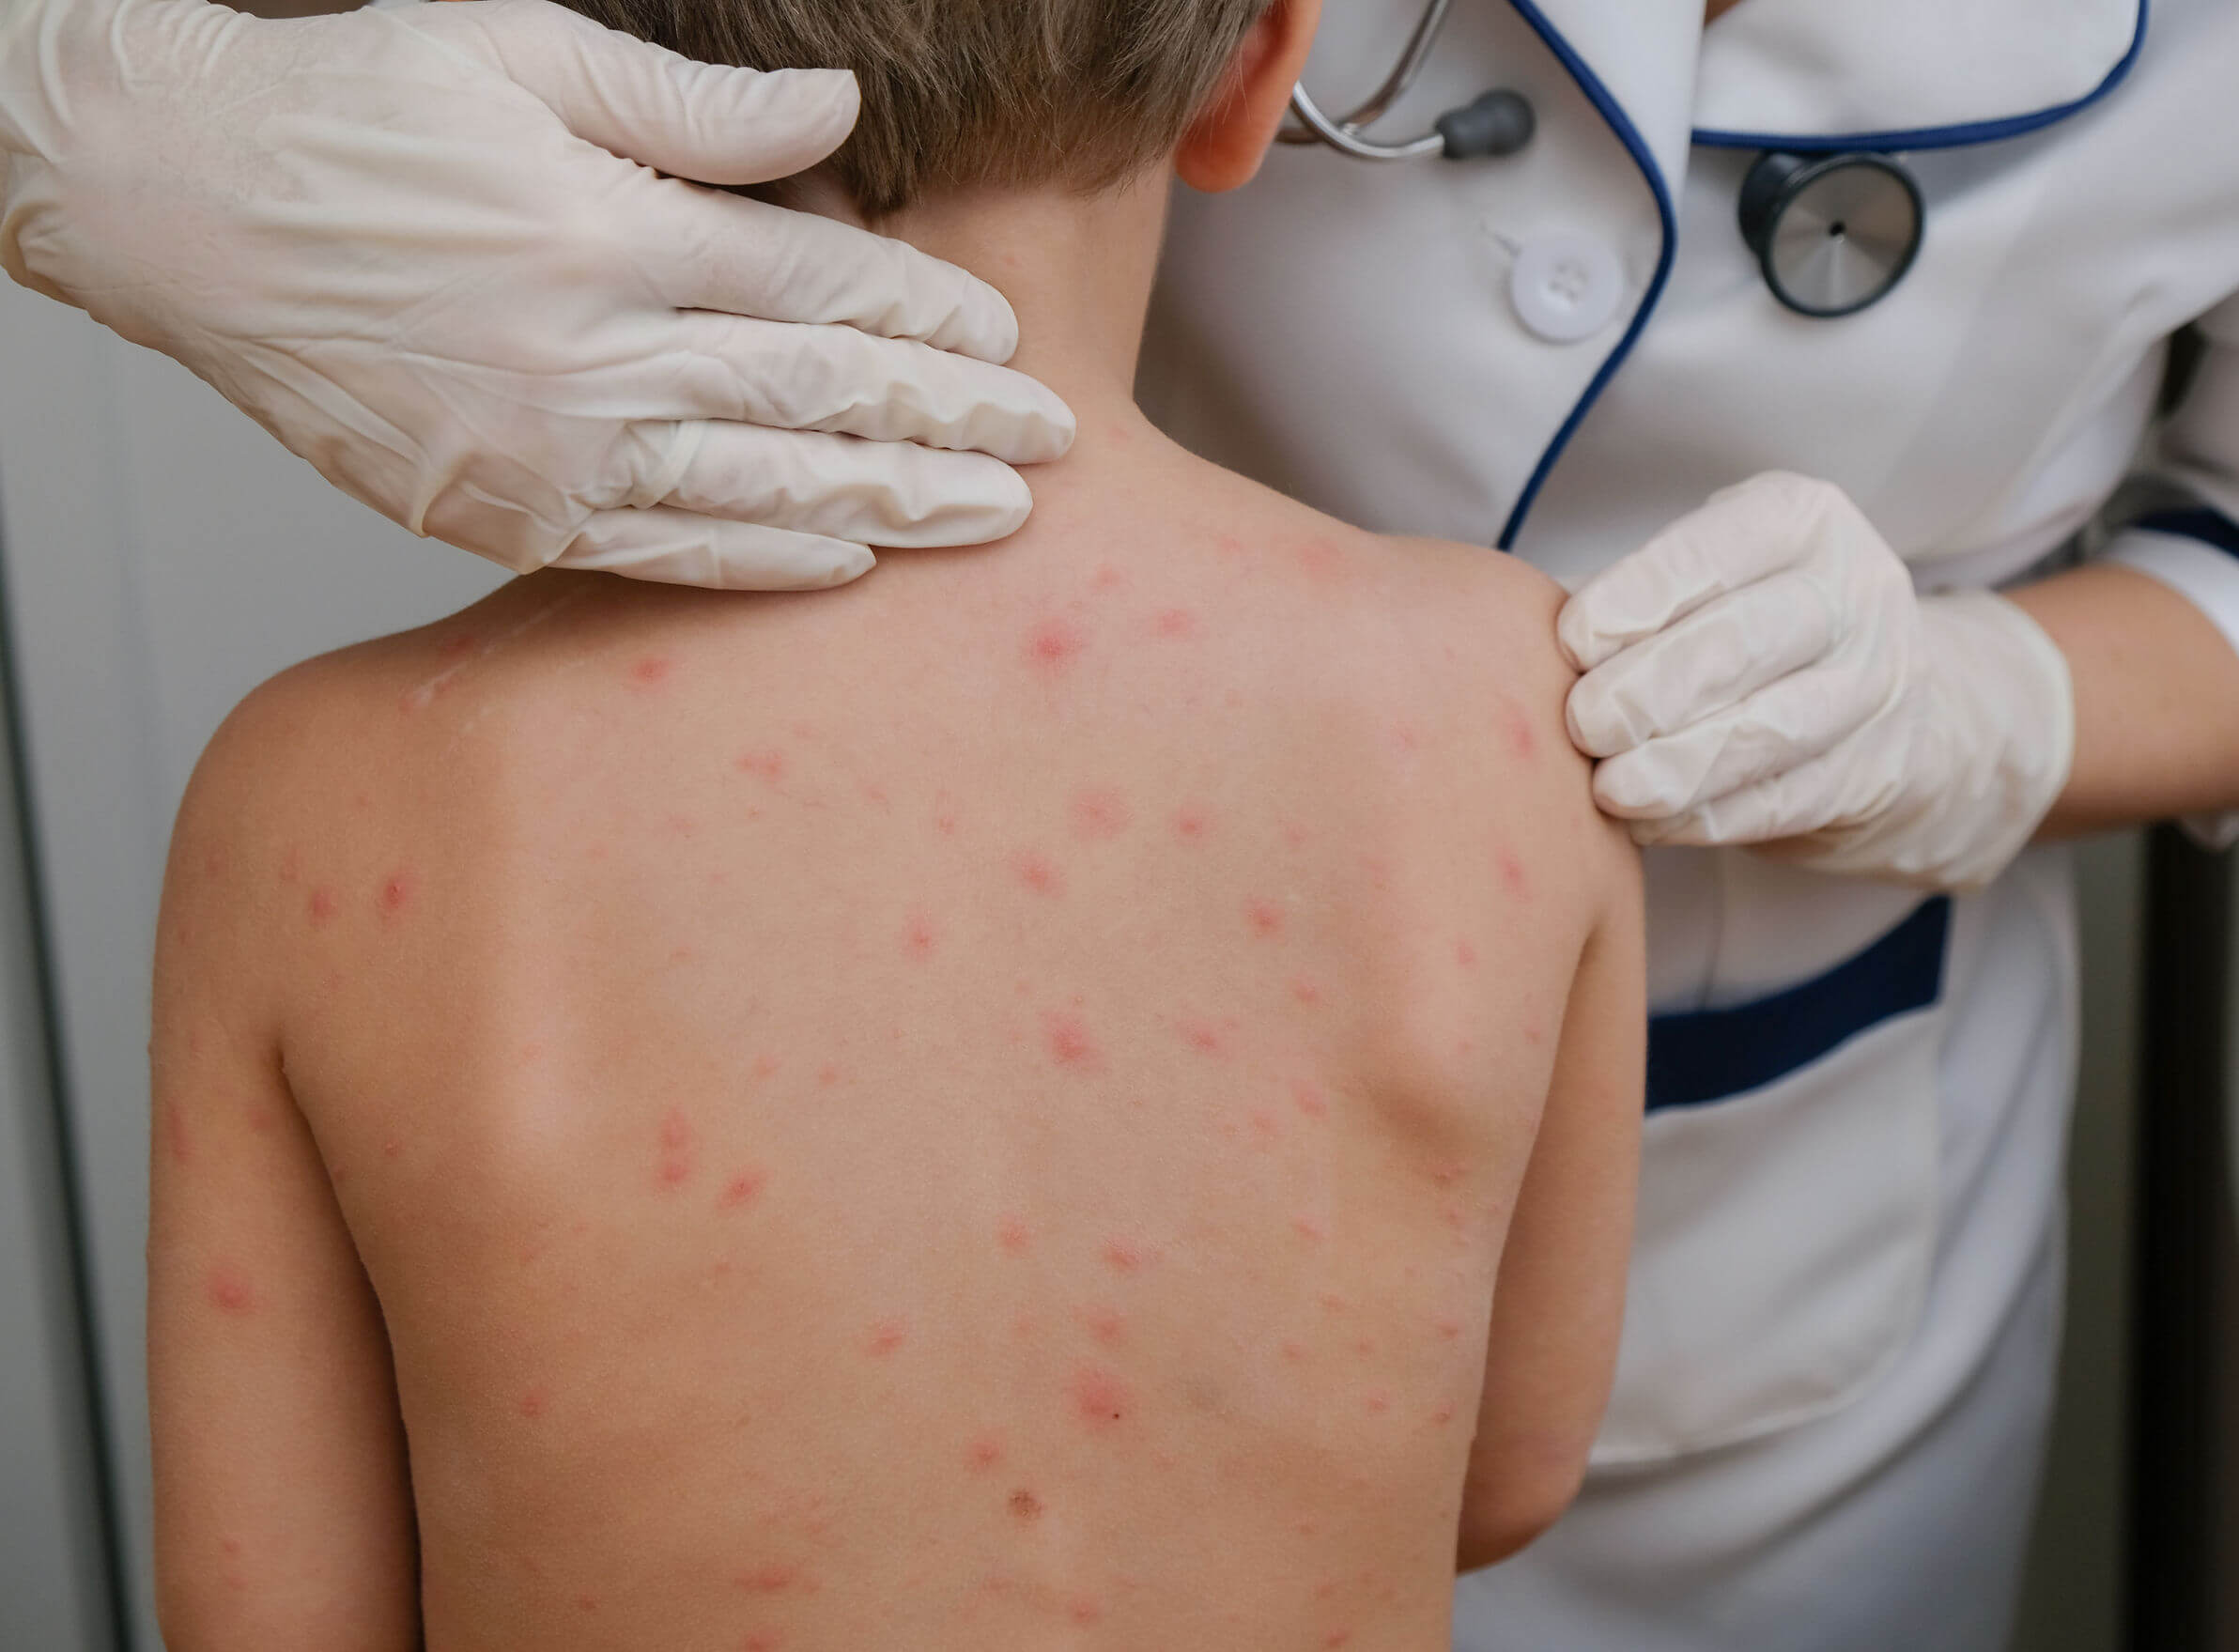 A child with a rash on his back being inspected by a doctor.